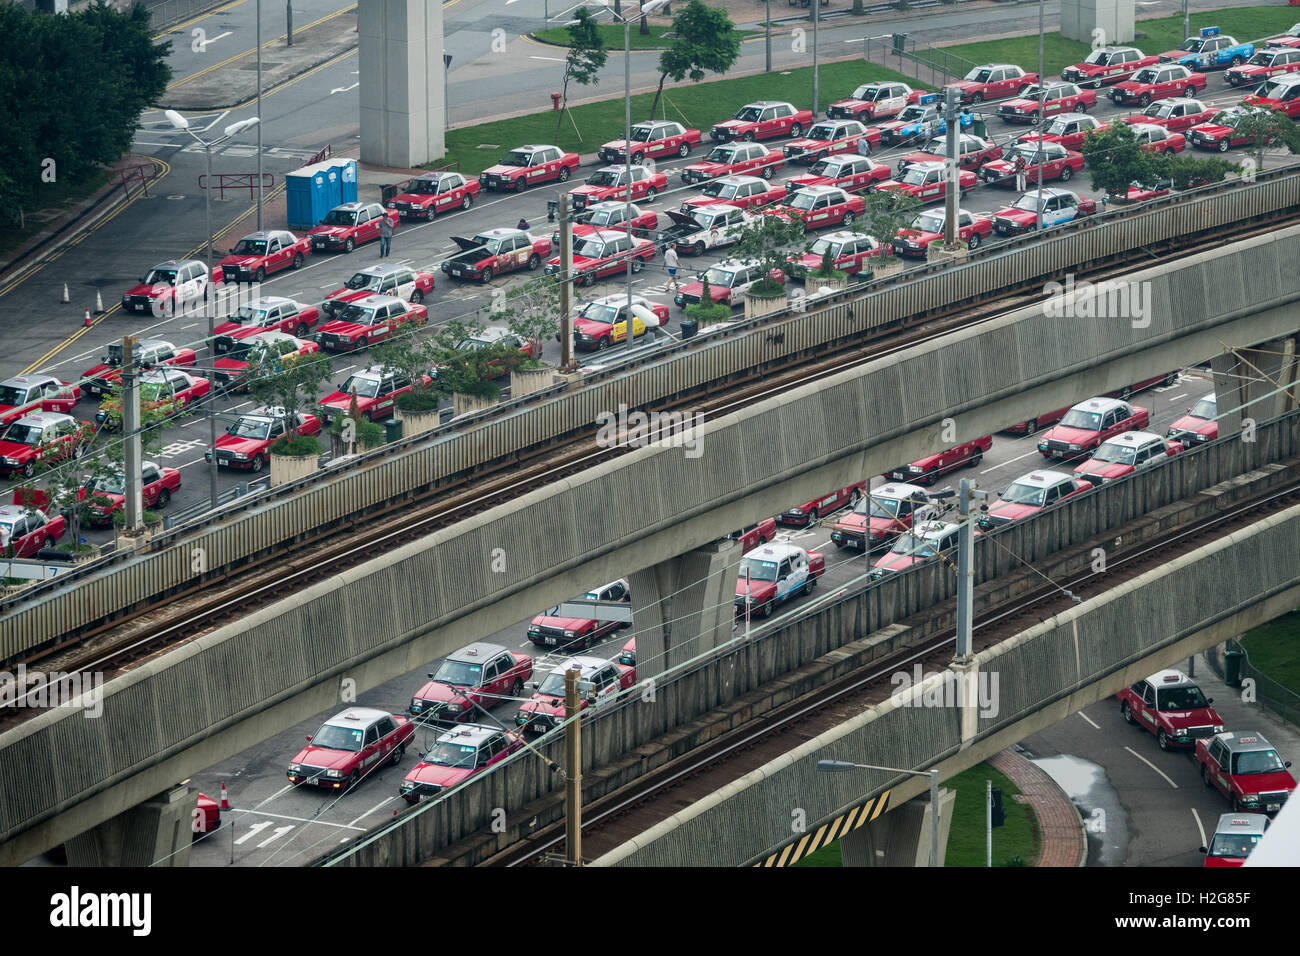 taxis wait to enter the arrivals stand at Hong Kong International Airport Stock Photo